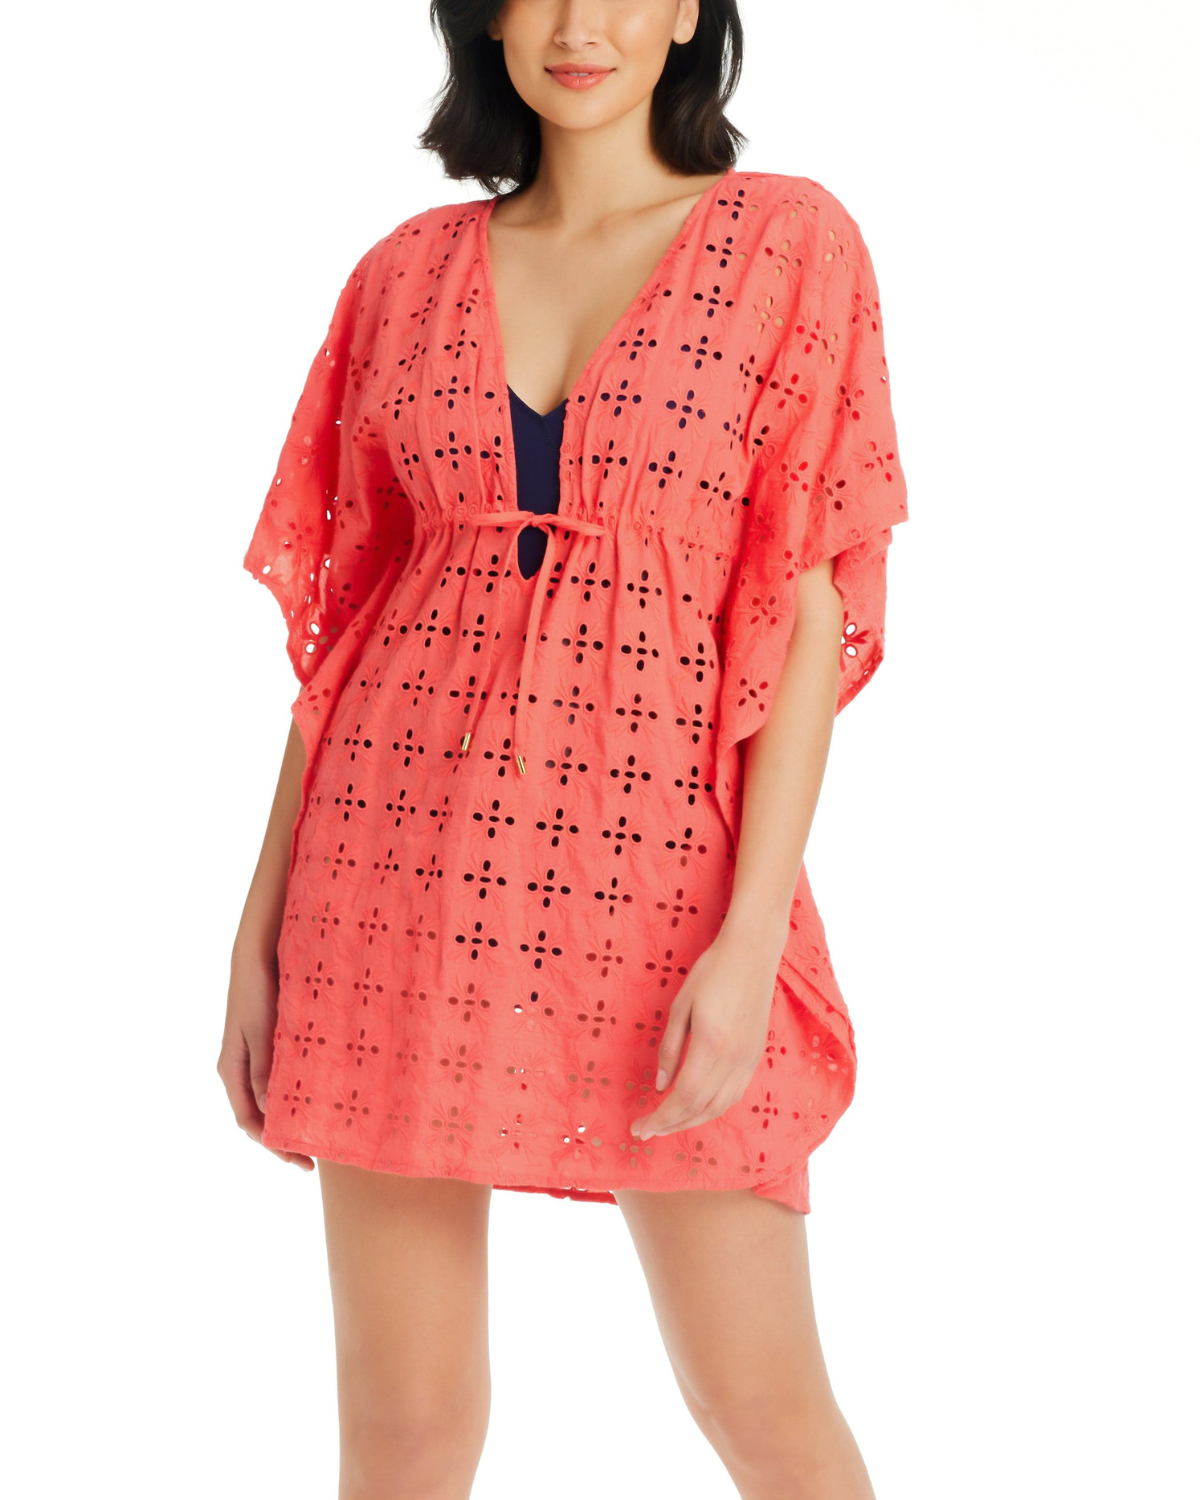 Model wearing a caftan cover up in coral